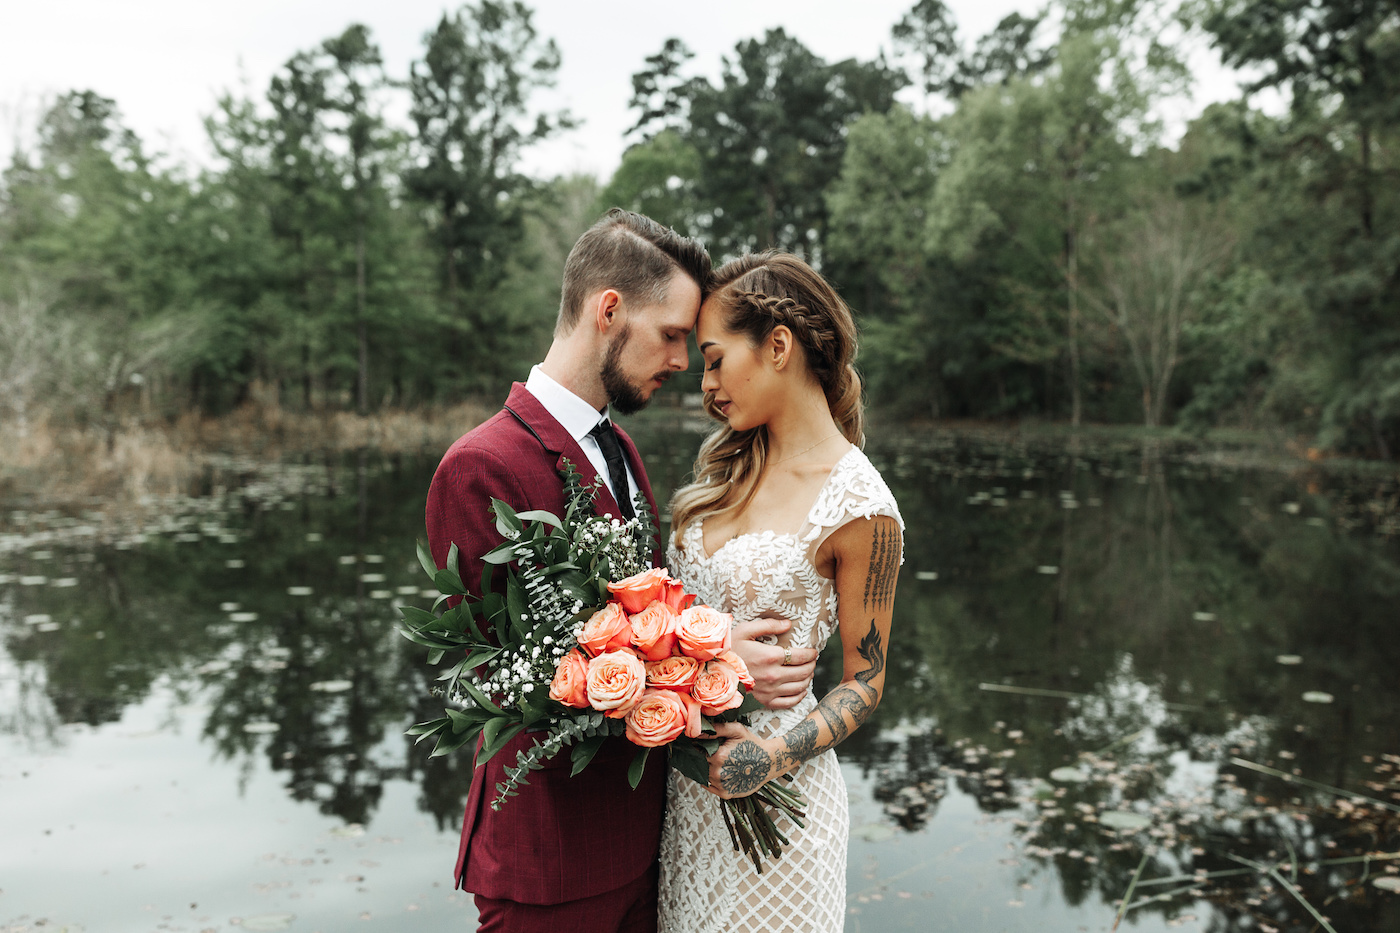 Planning a Modern and Moody Wedding? Here are Some Tips from Top Wedding Pros